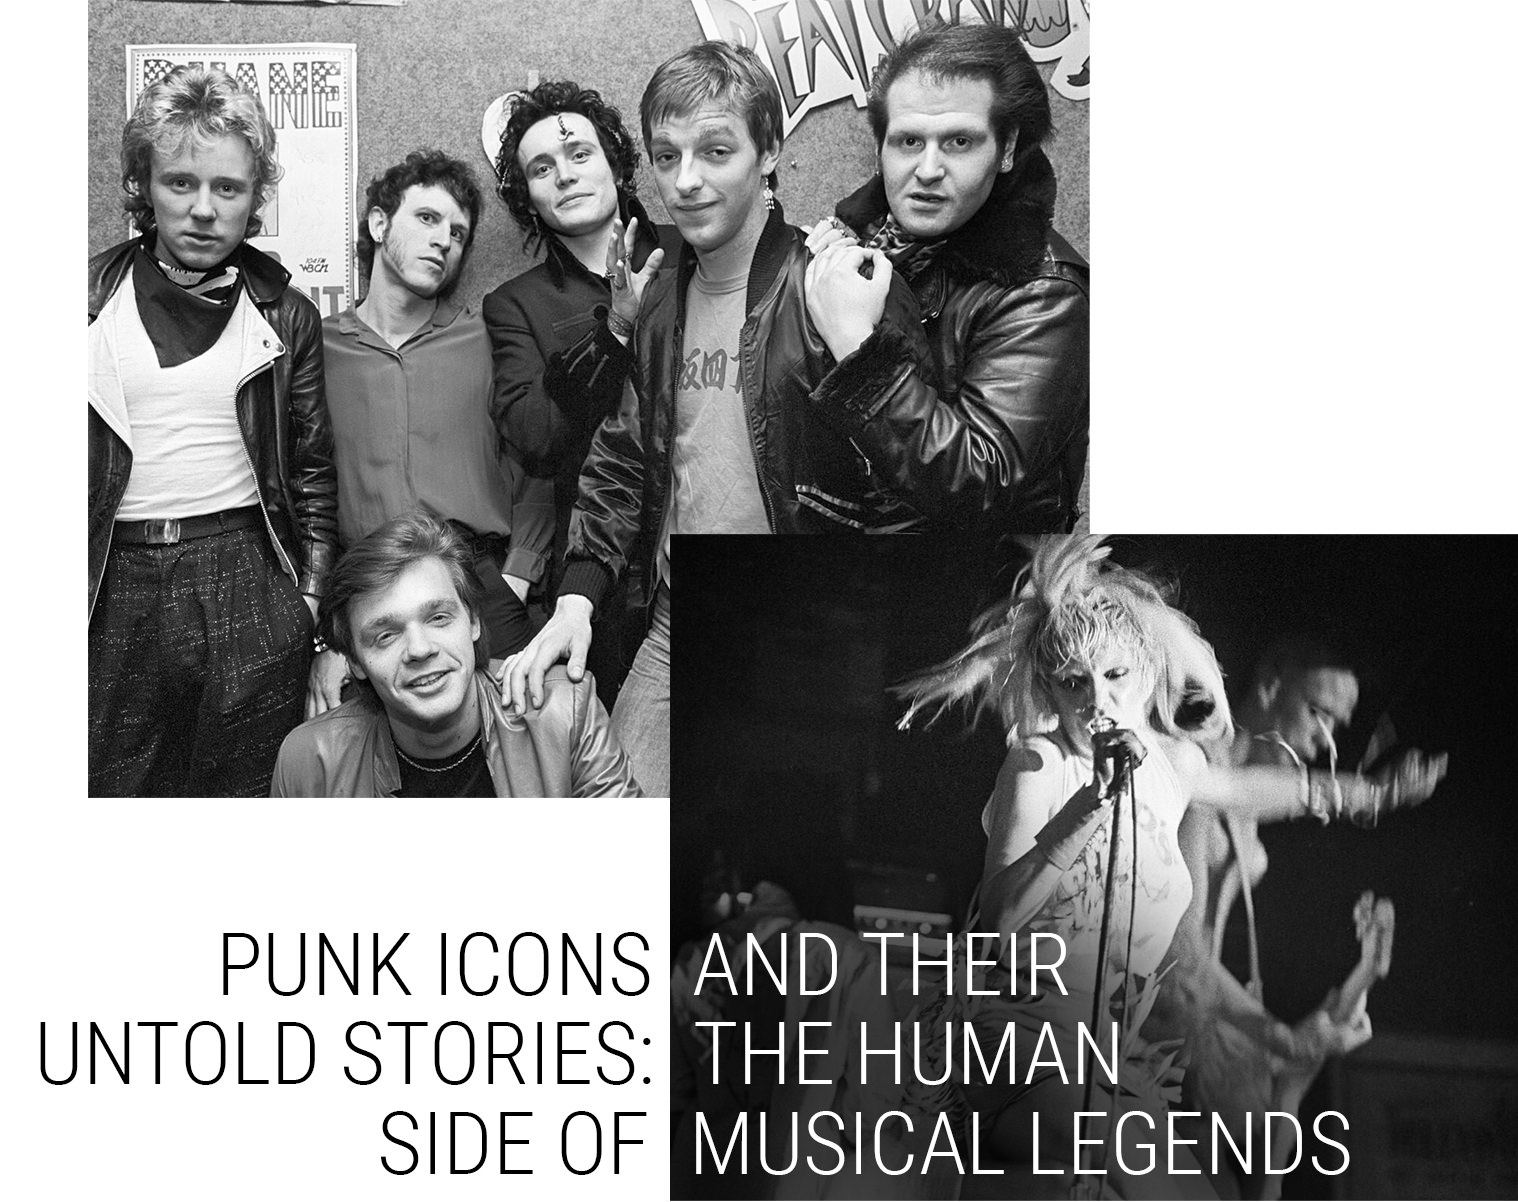 Punk-Icons-and-Their-Untold-Stories-The-Human-Side-of-Musical-Legends-Header-3.jpg